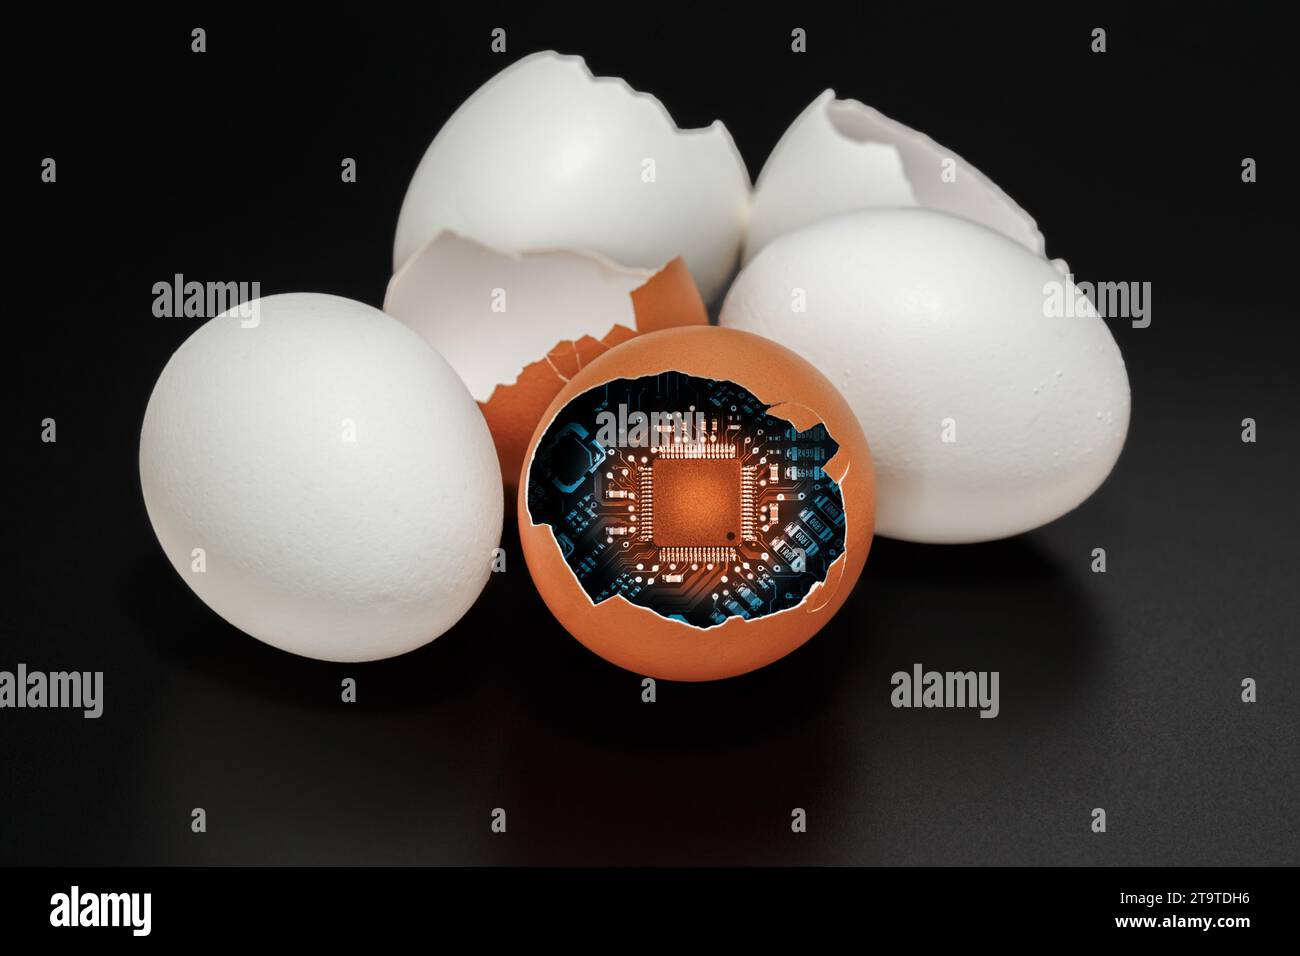 A printed circuit board with a microprocessor inside a chicken egg shell. The concept of research and the birth of new technologies. Stock Photo